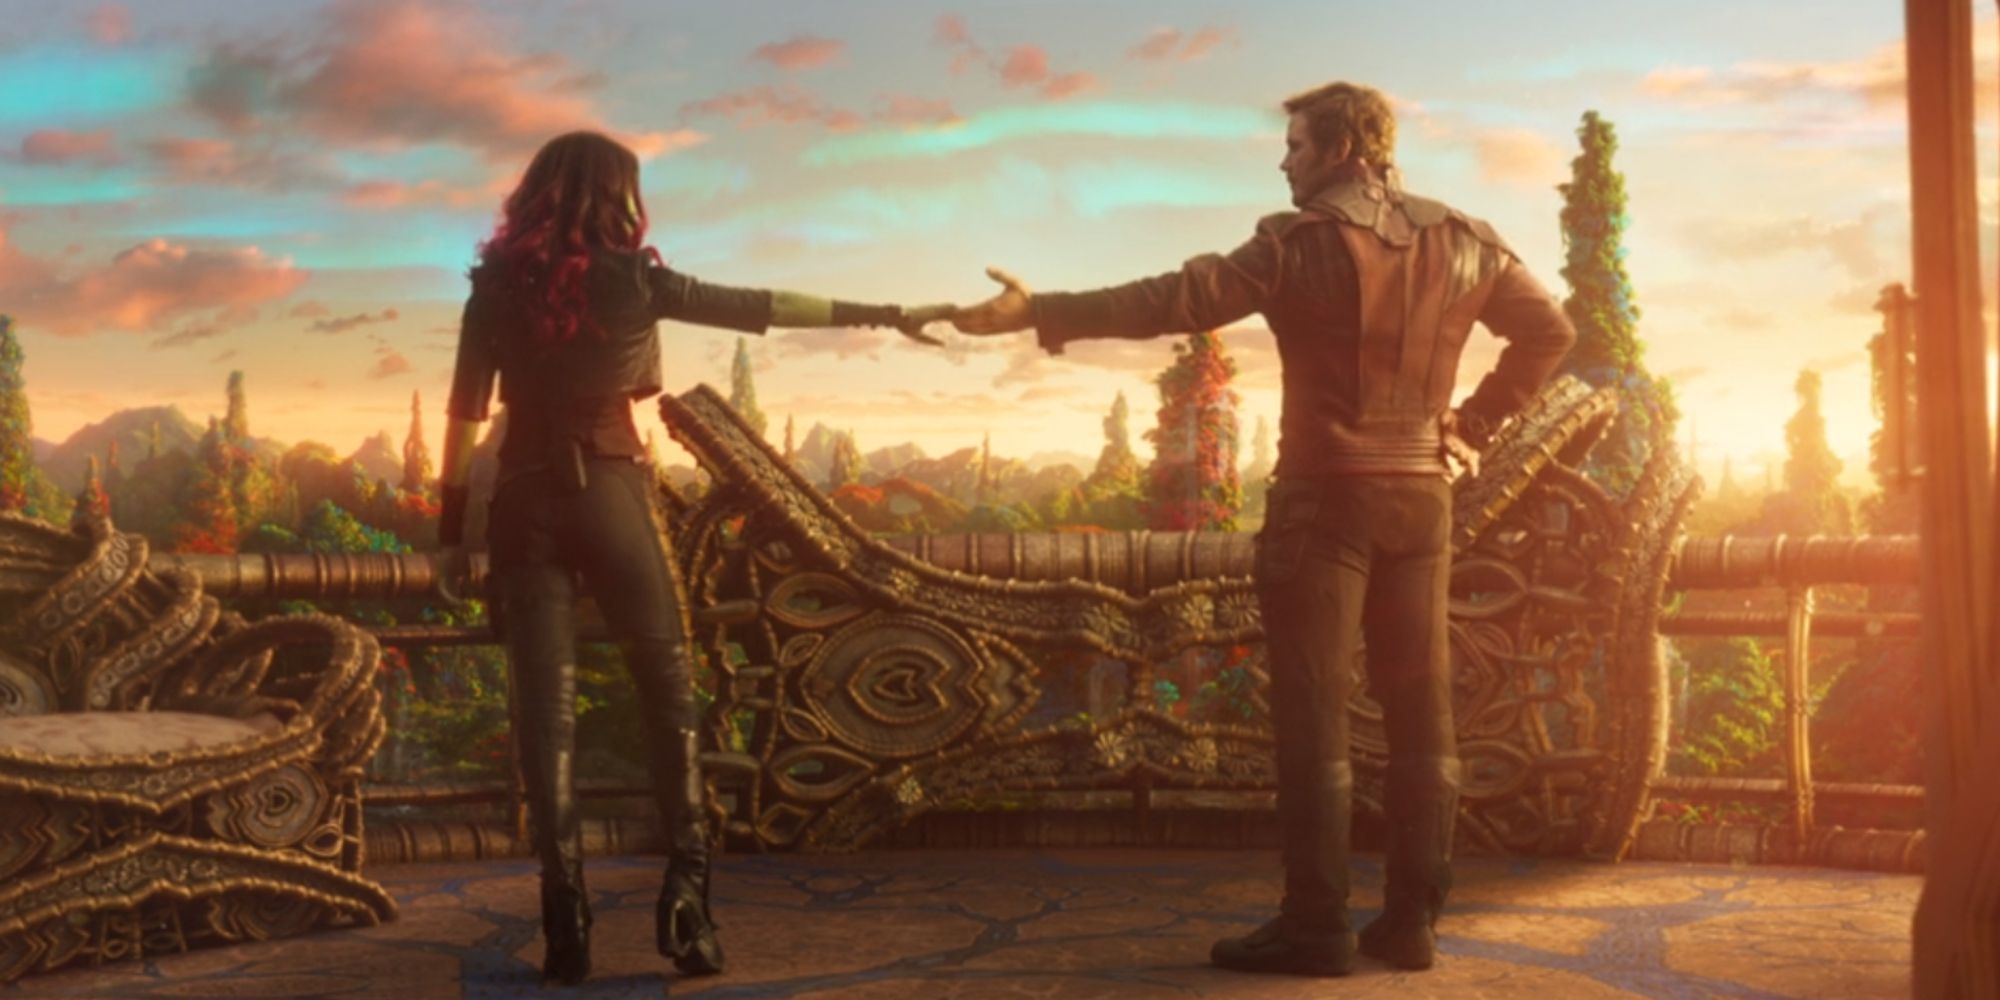 Peter Quill dancing with Gamora on Egos planet in Guardians Of The Galaxy Vol. 2